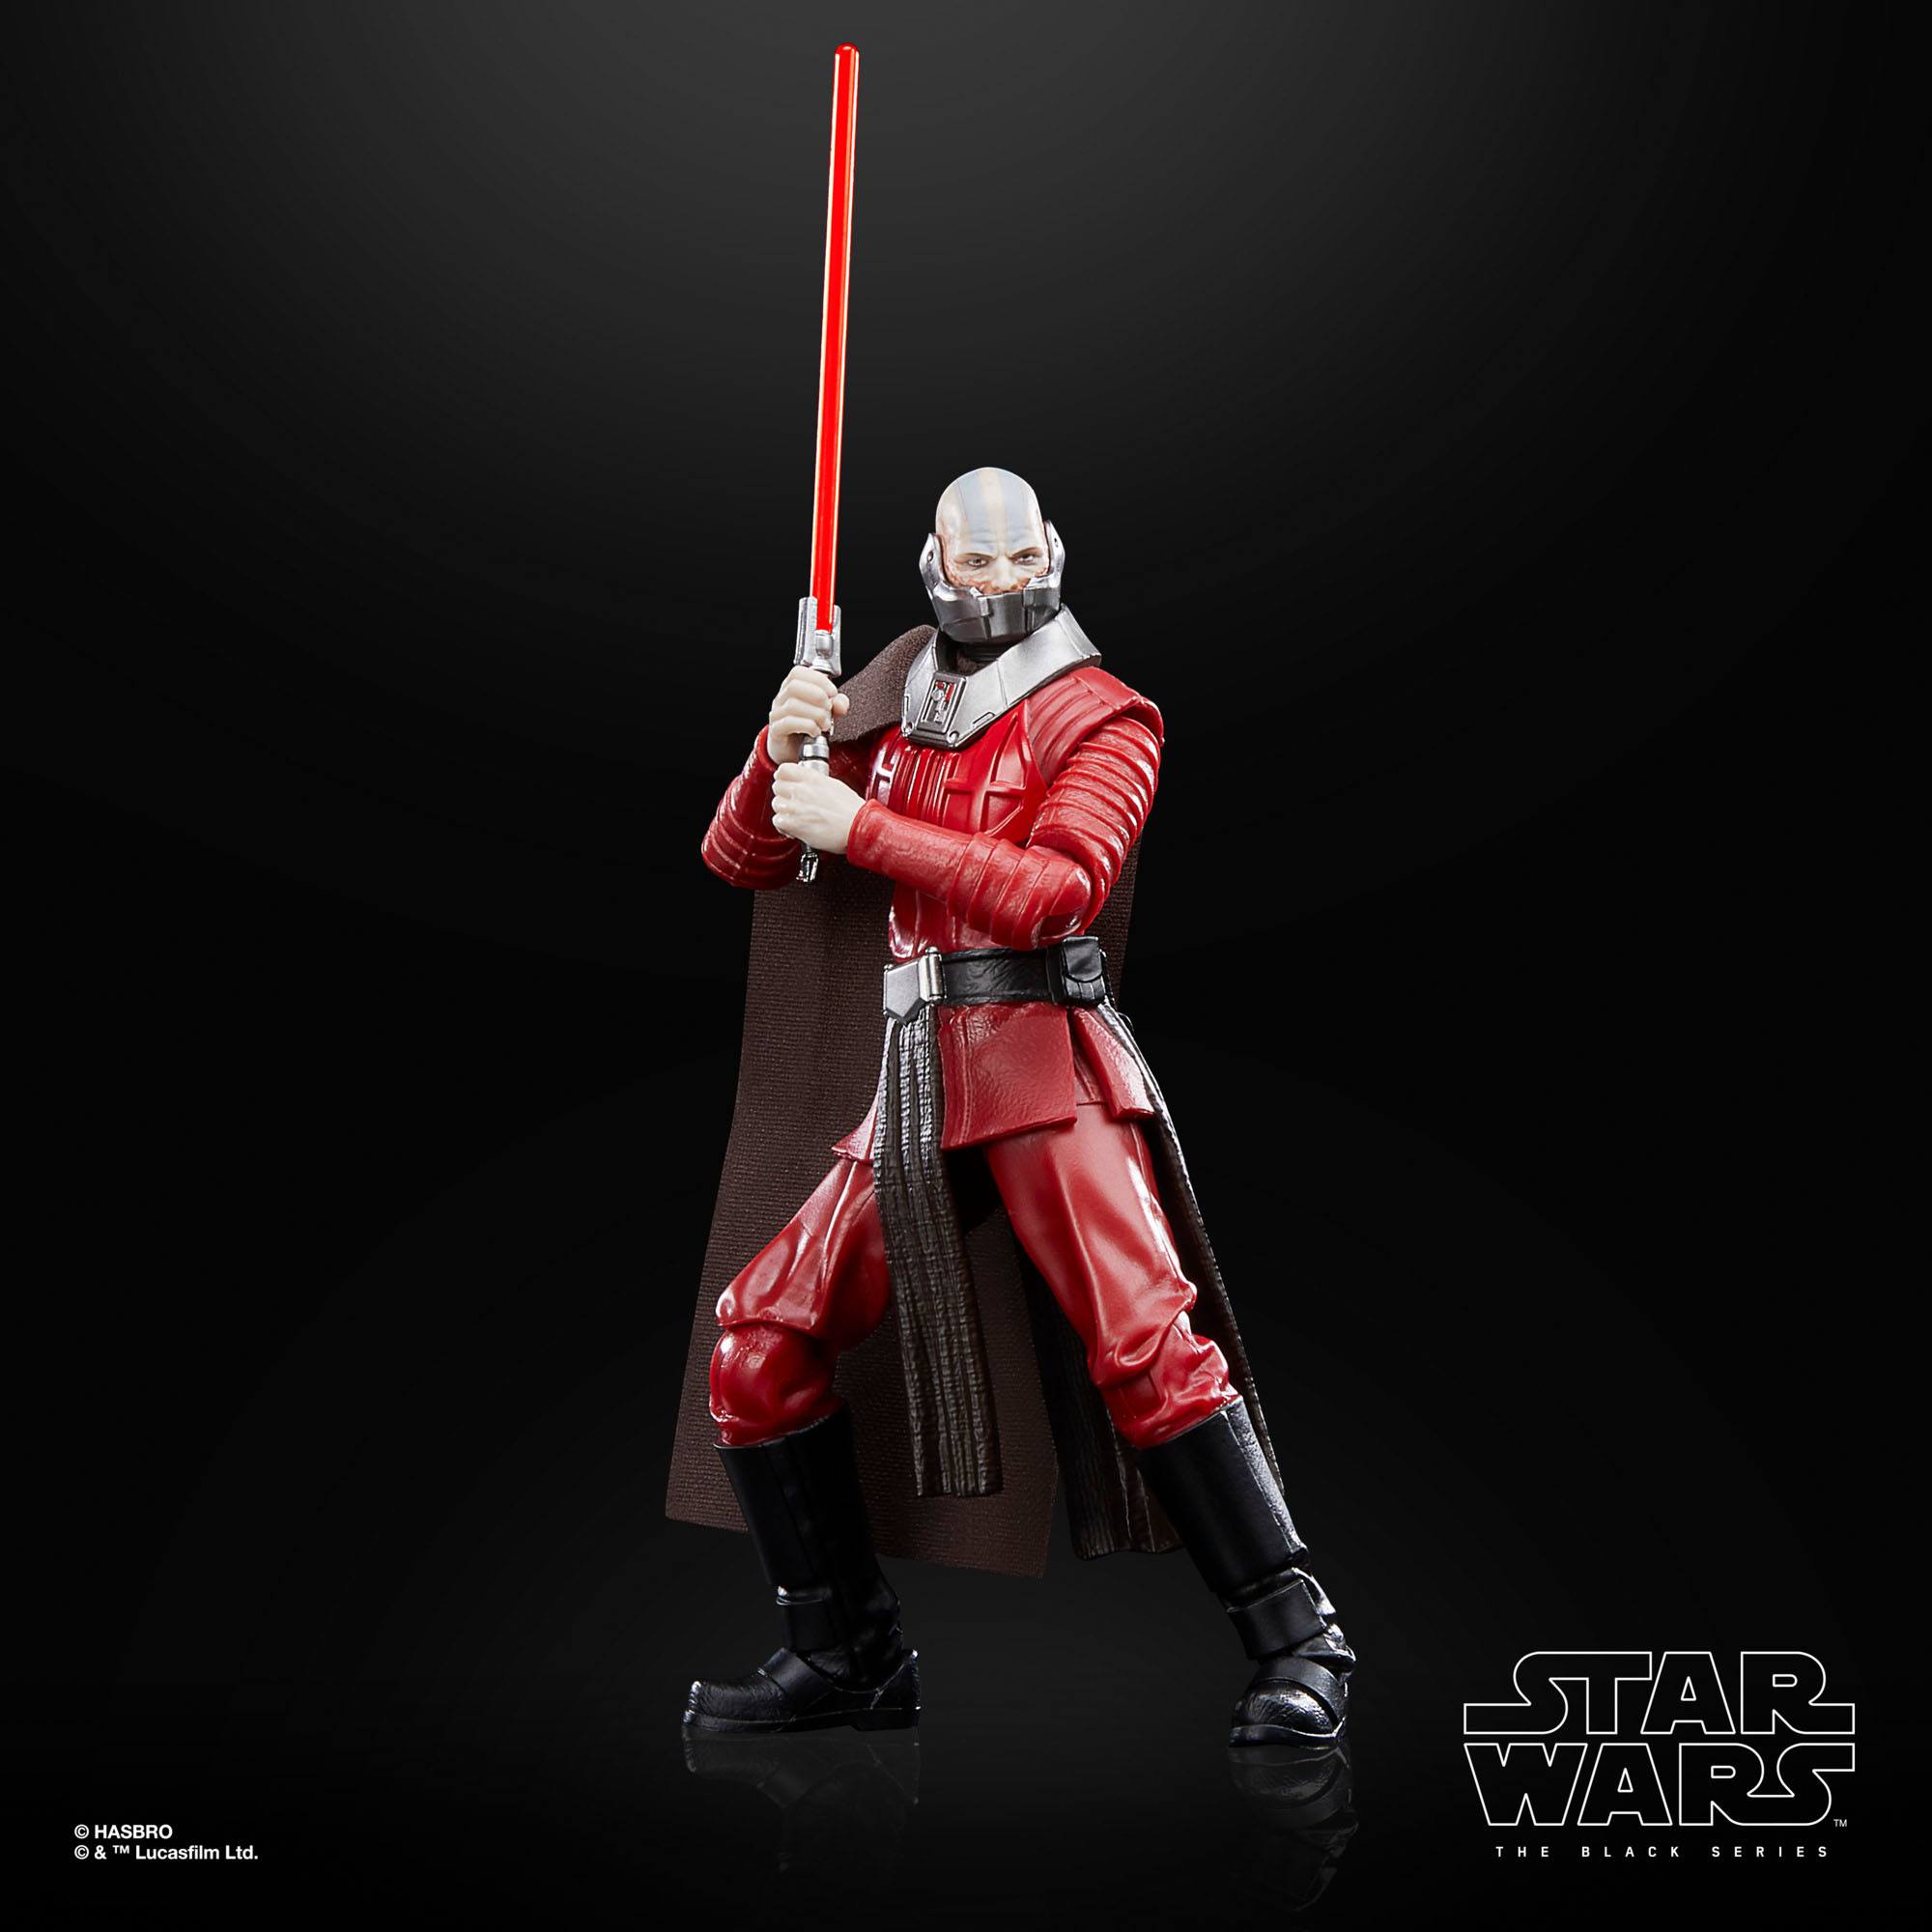 Star Wars: Knights of the Old Republic Black Series Gaming Greats Actionfigur Darth Malak 15 cm F70945L00 5010996124791